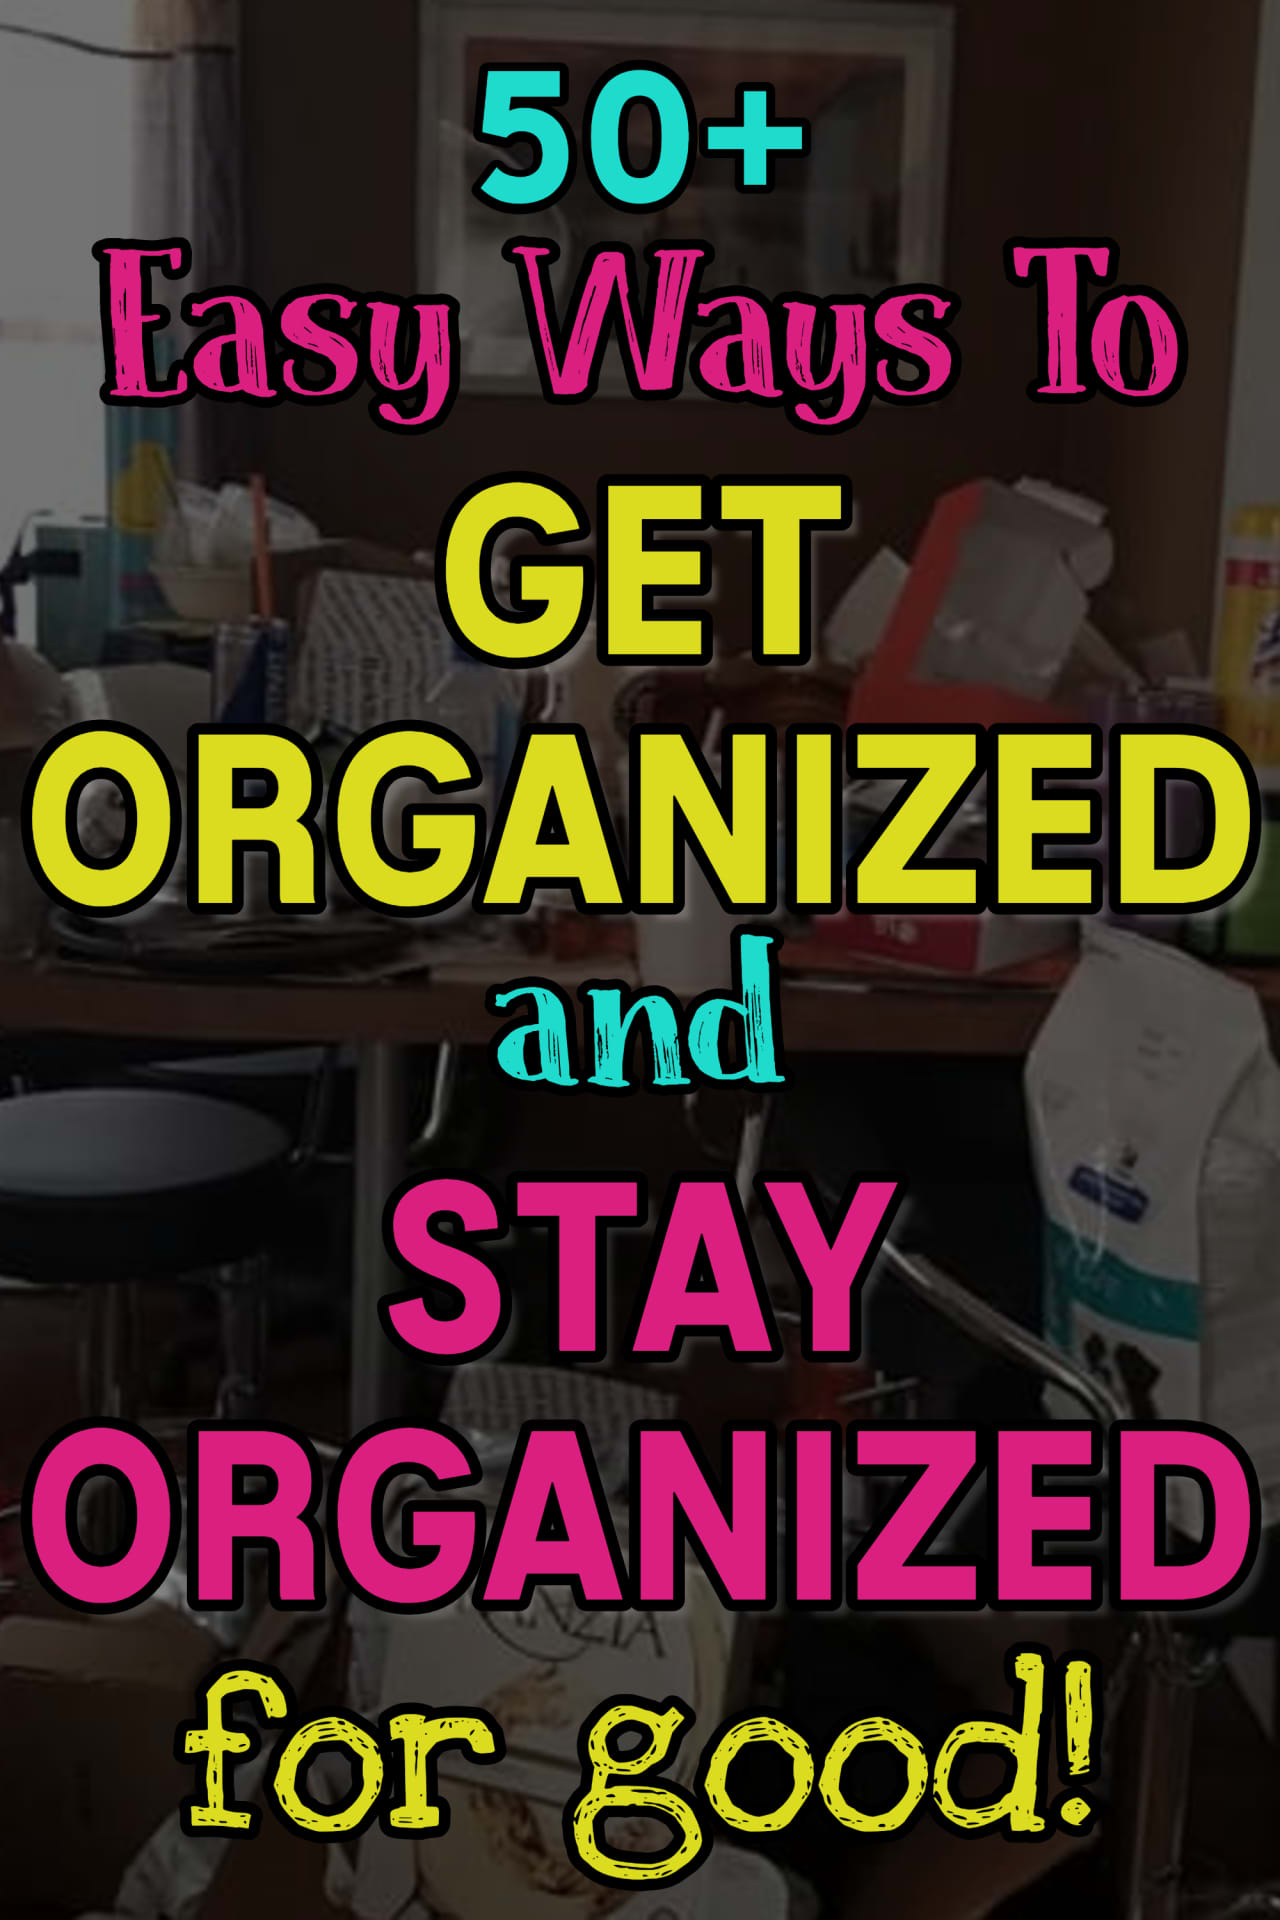 Get Organized At Home! Getting Organized at Home Where to Start - 50+ ways to organize everything in your home the EASY way (even if you want to know how to organize your home on a BUDGET). These clever ways to organize your room, small spaces, and random JUNK are all budget-friendly and such simple DIY storage and organization ideas!